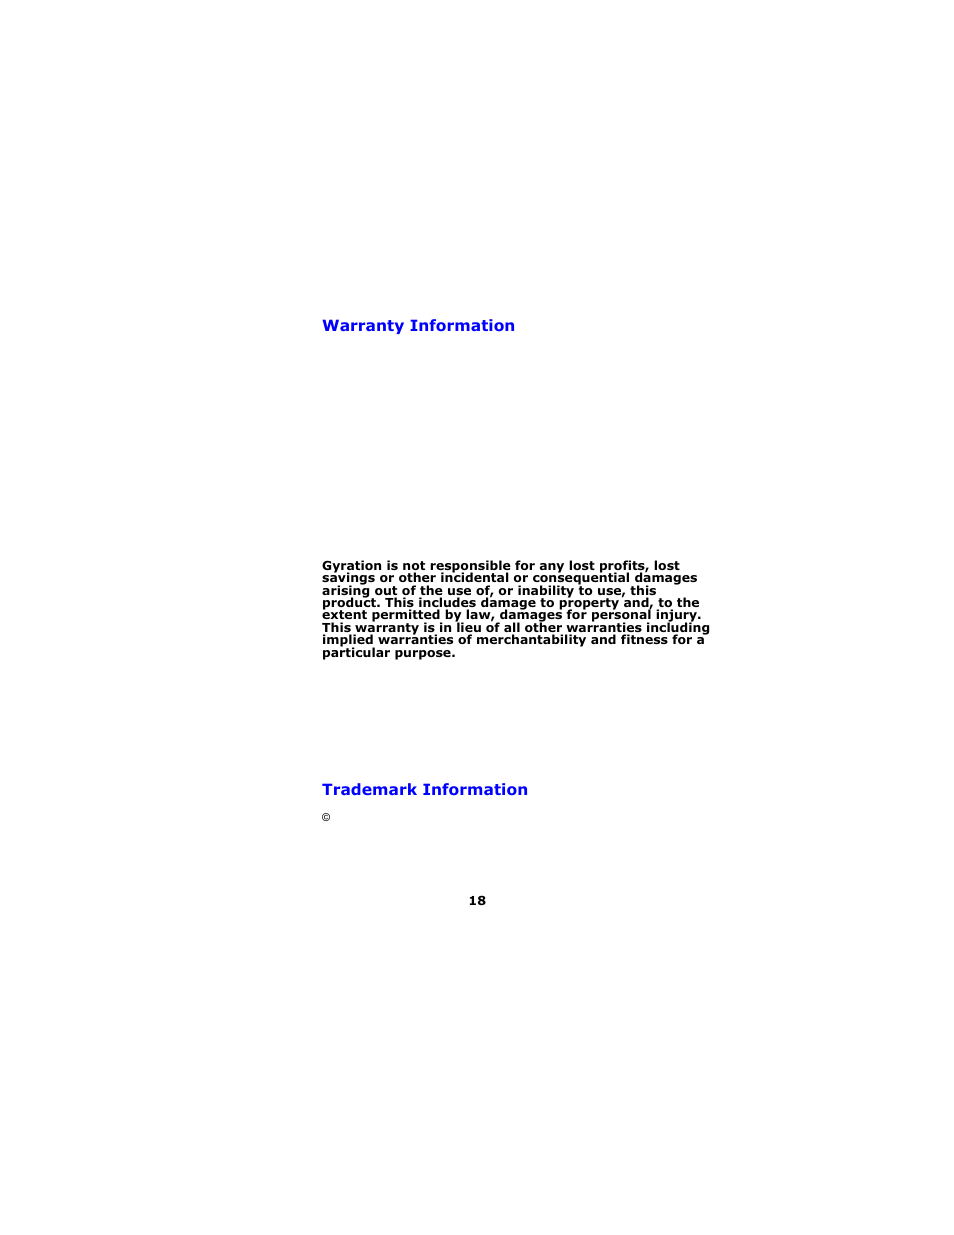 Warranty information, Trademark information | Gyration Ultra Cordless Optical Mouse User Manual | Page 21 / 22